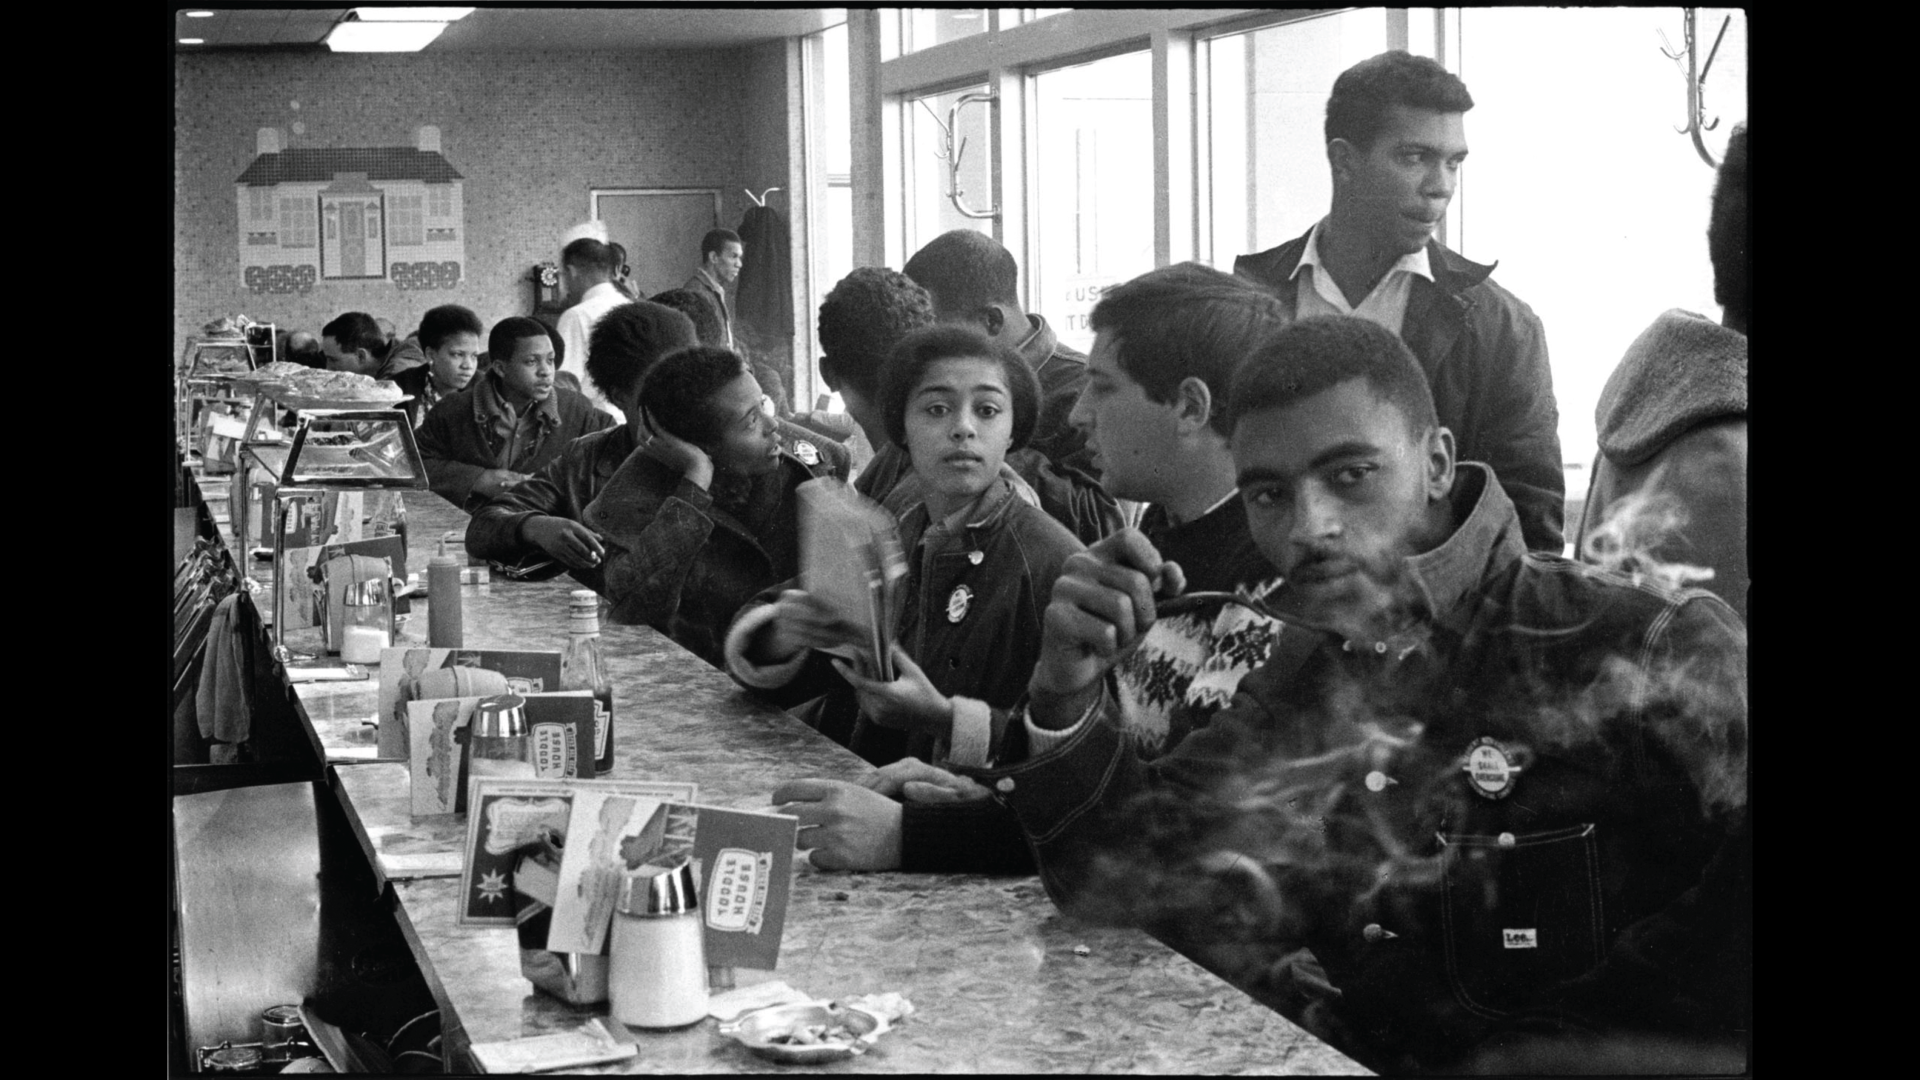 Danny Lyon: Memories of the Southern Civil Rights Movement 